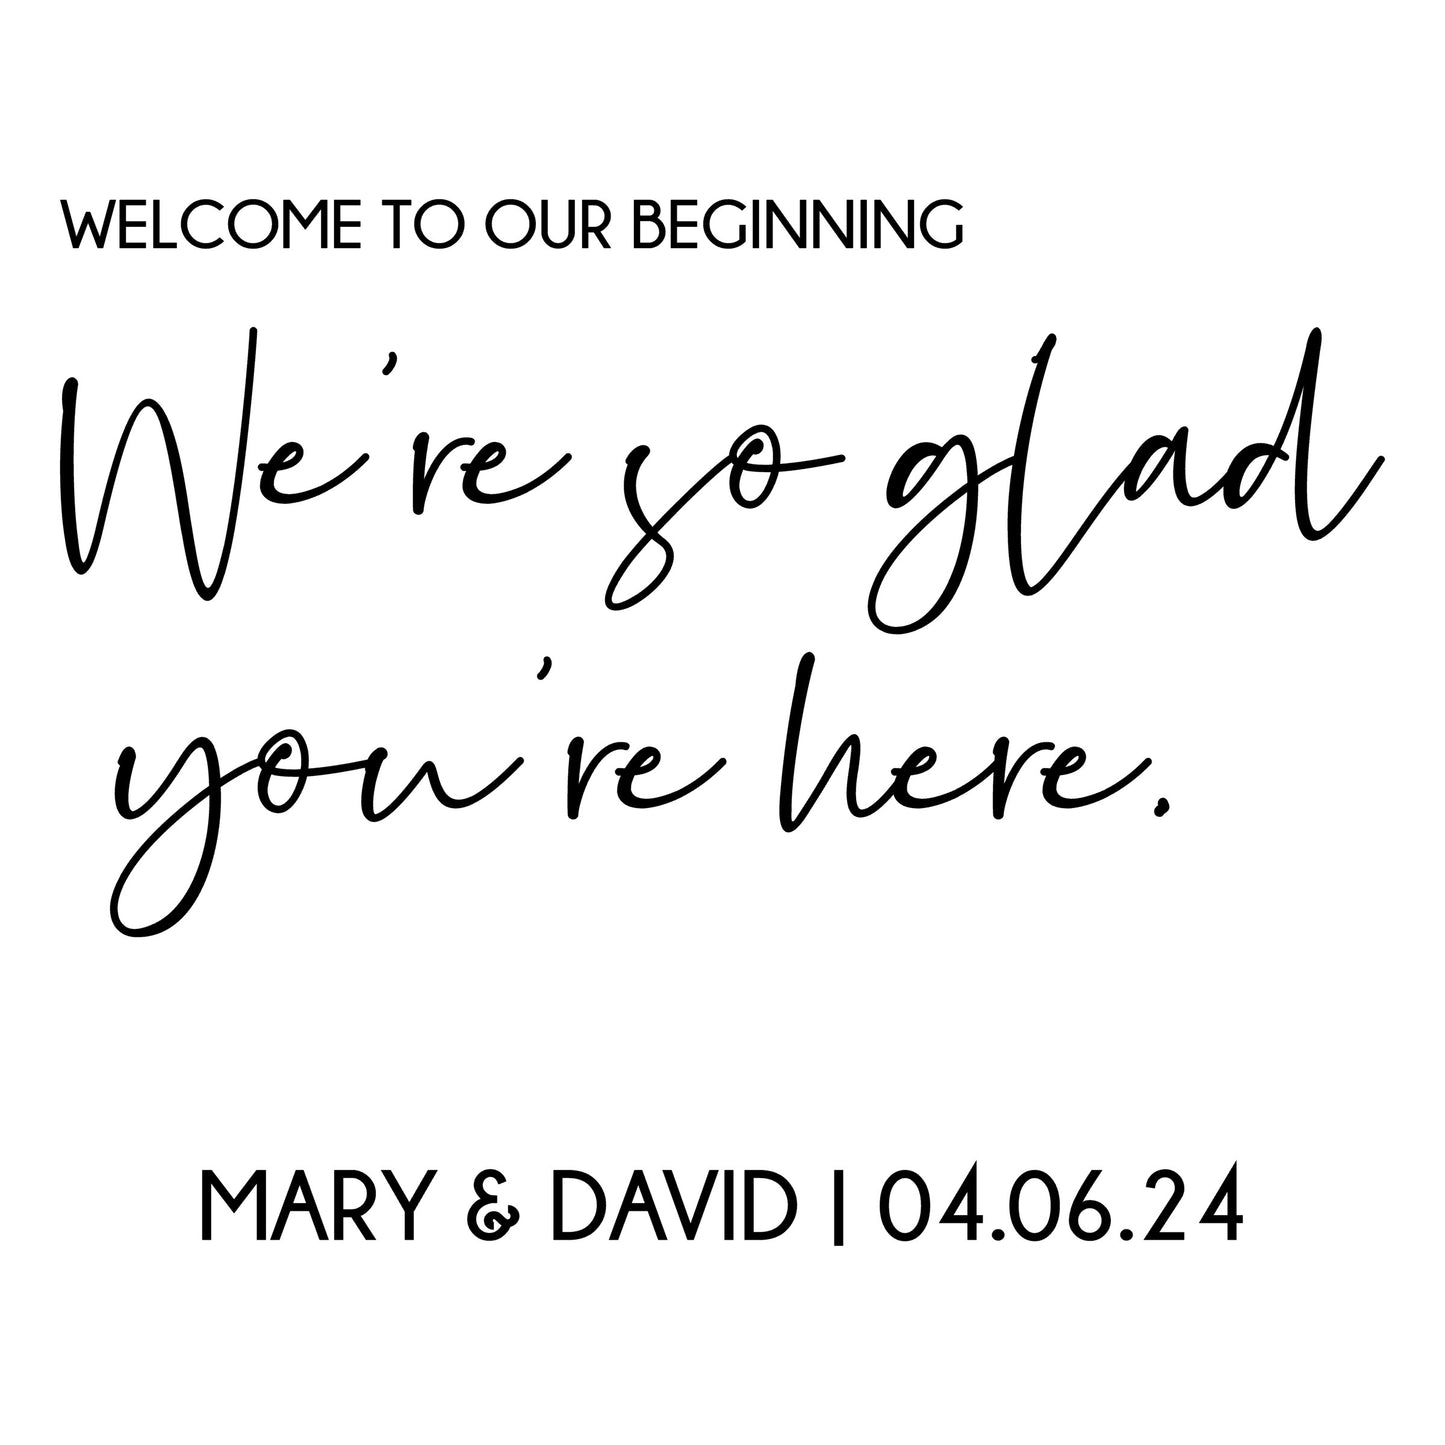 Welcome to our Beginning Flower Box Sign Decal for Wedding Reception